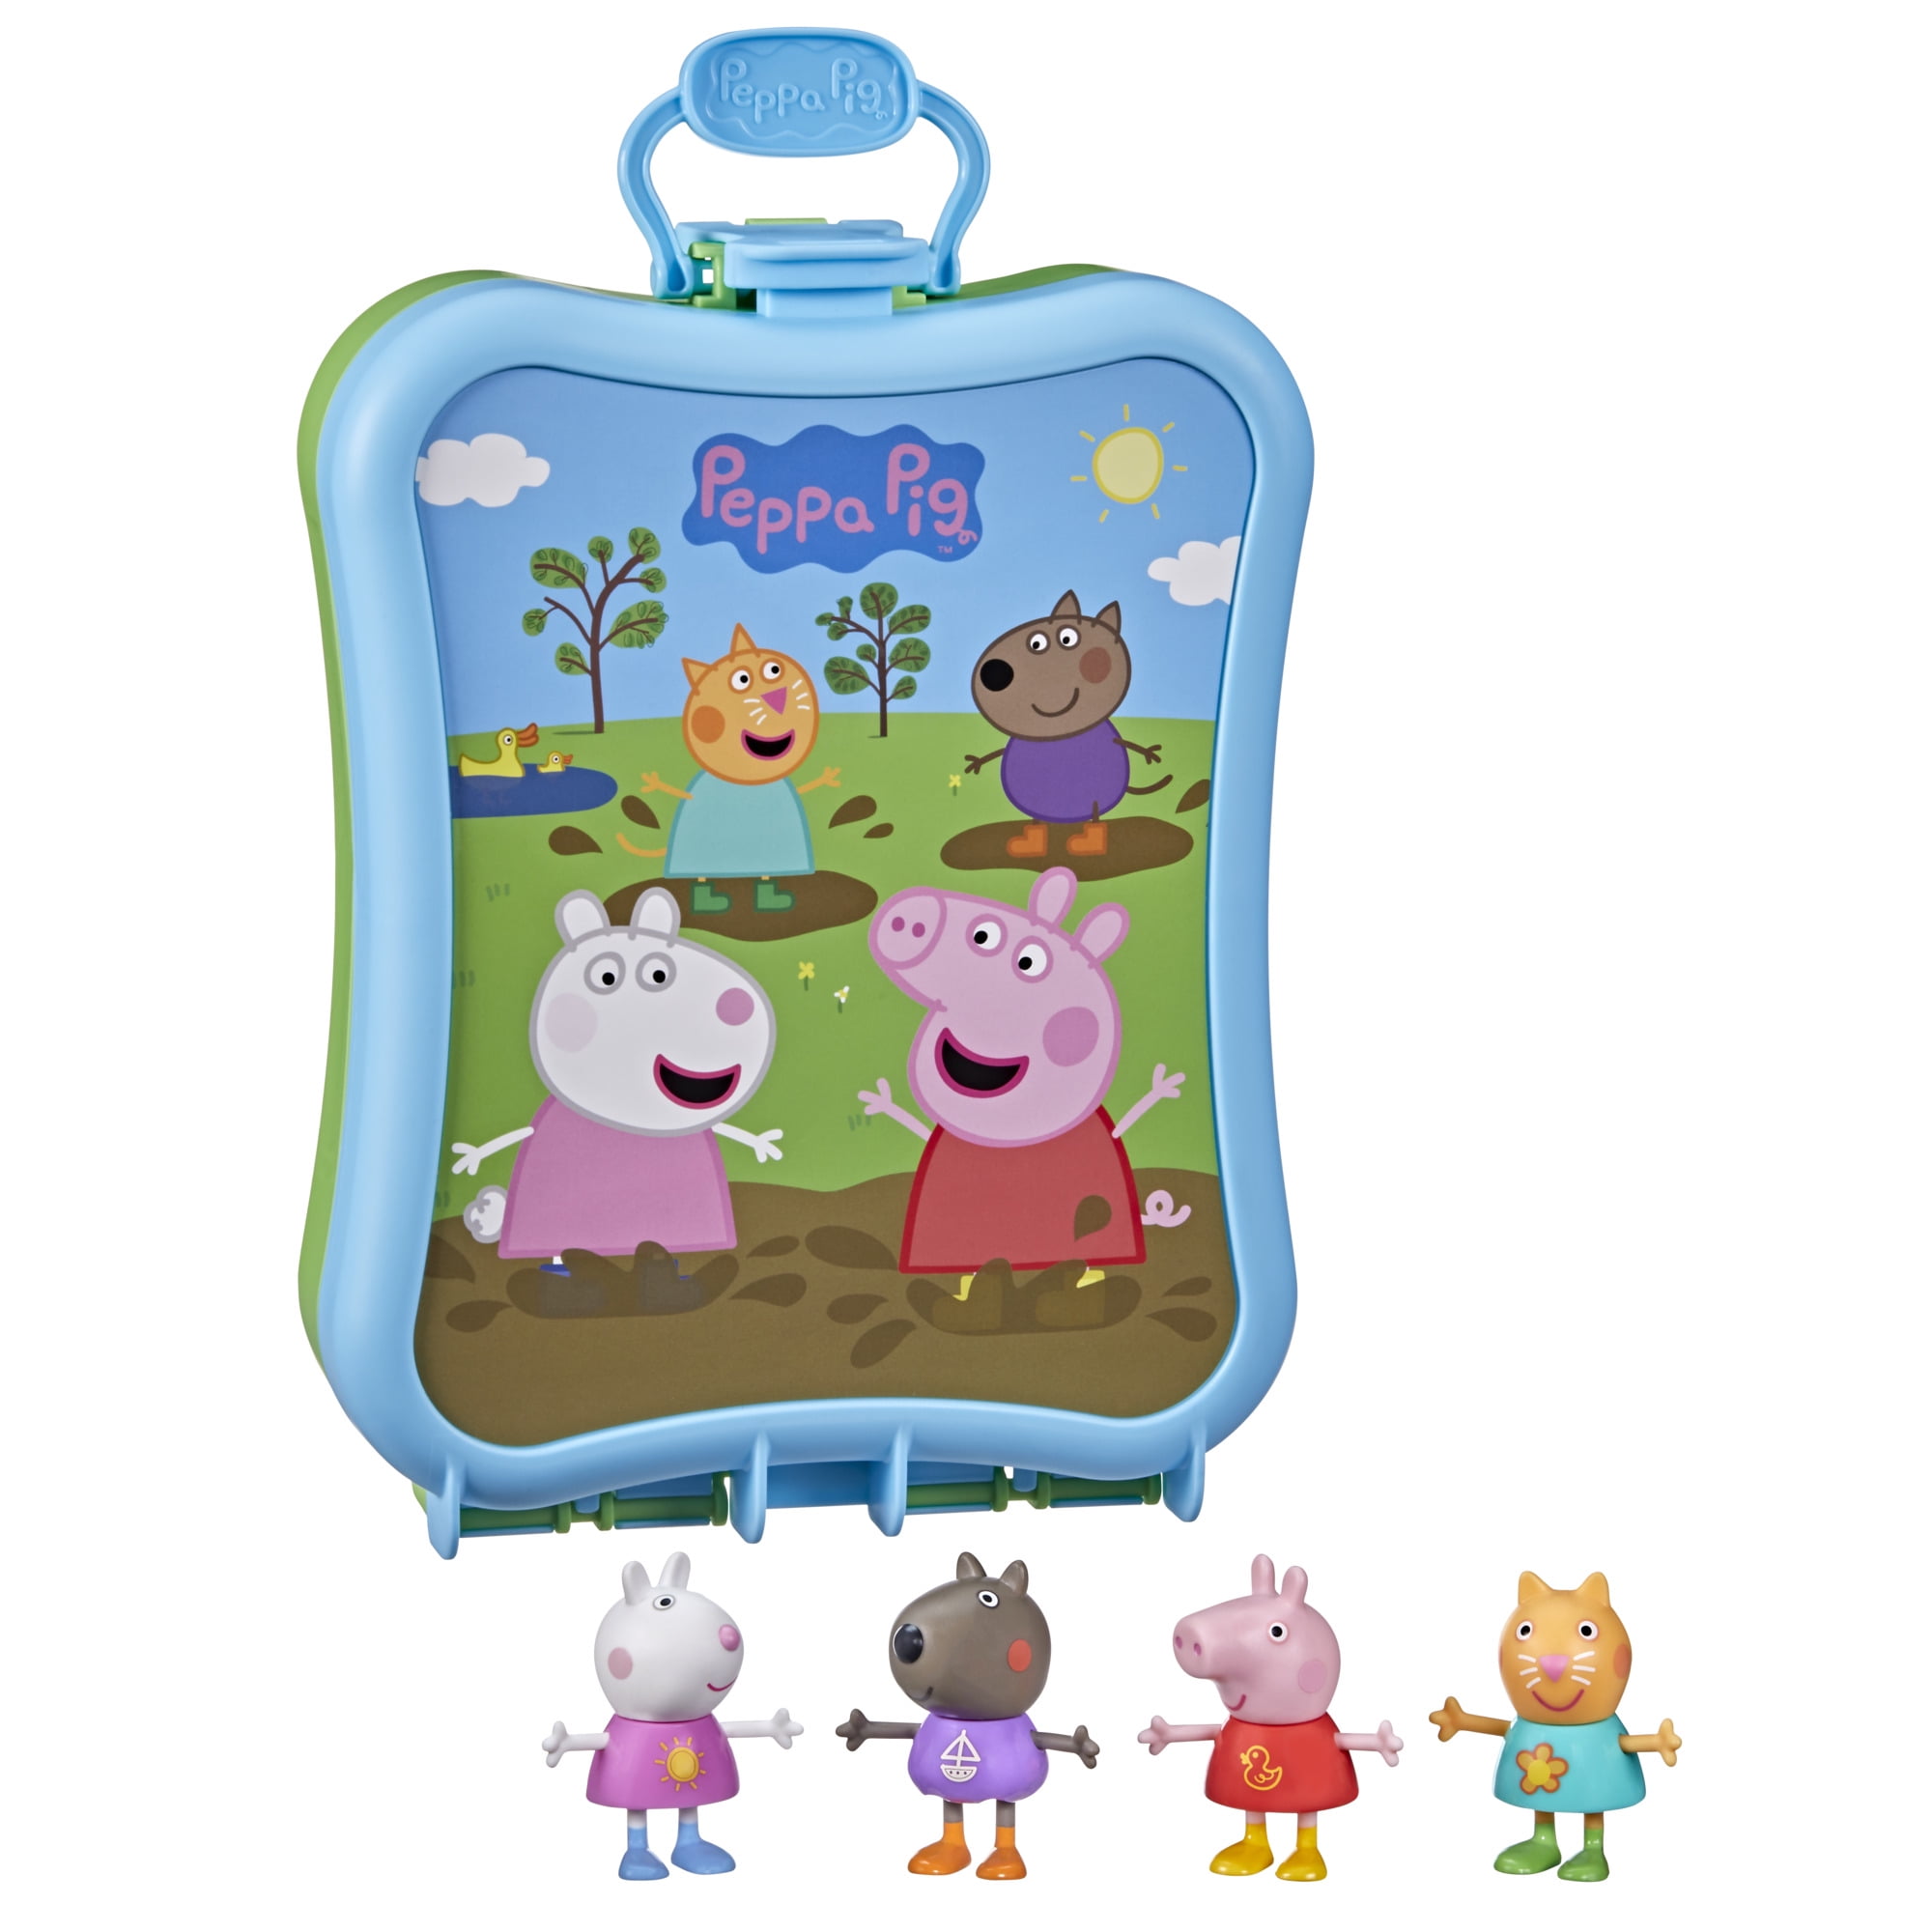 Peppa Pig Camping Trip Playset #92695 by Jazwares for sale online 